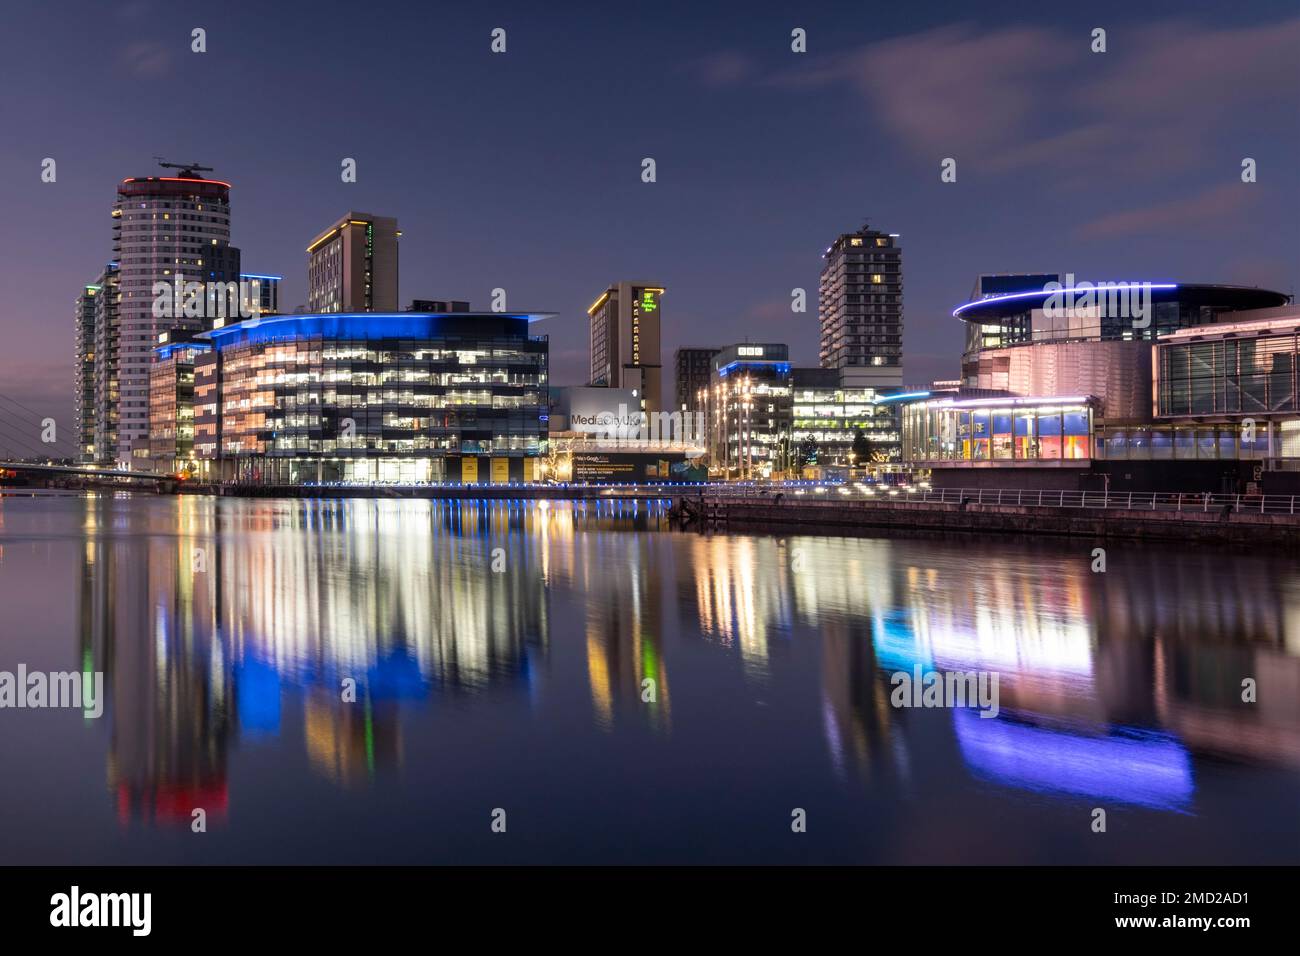 MediaCityUK & The Lowry Centre at night, Salford Quays, Salford, Manchester, England, UK Stock Photo